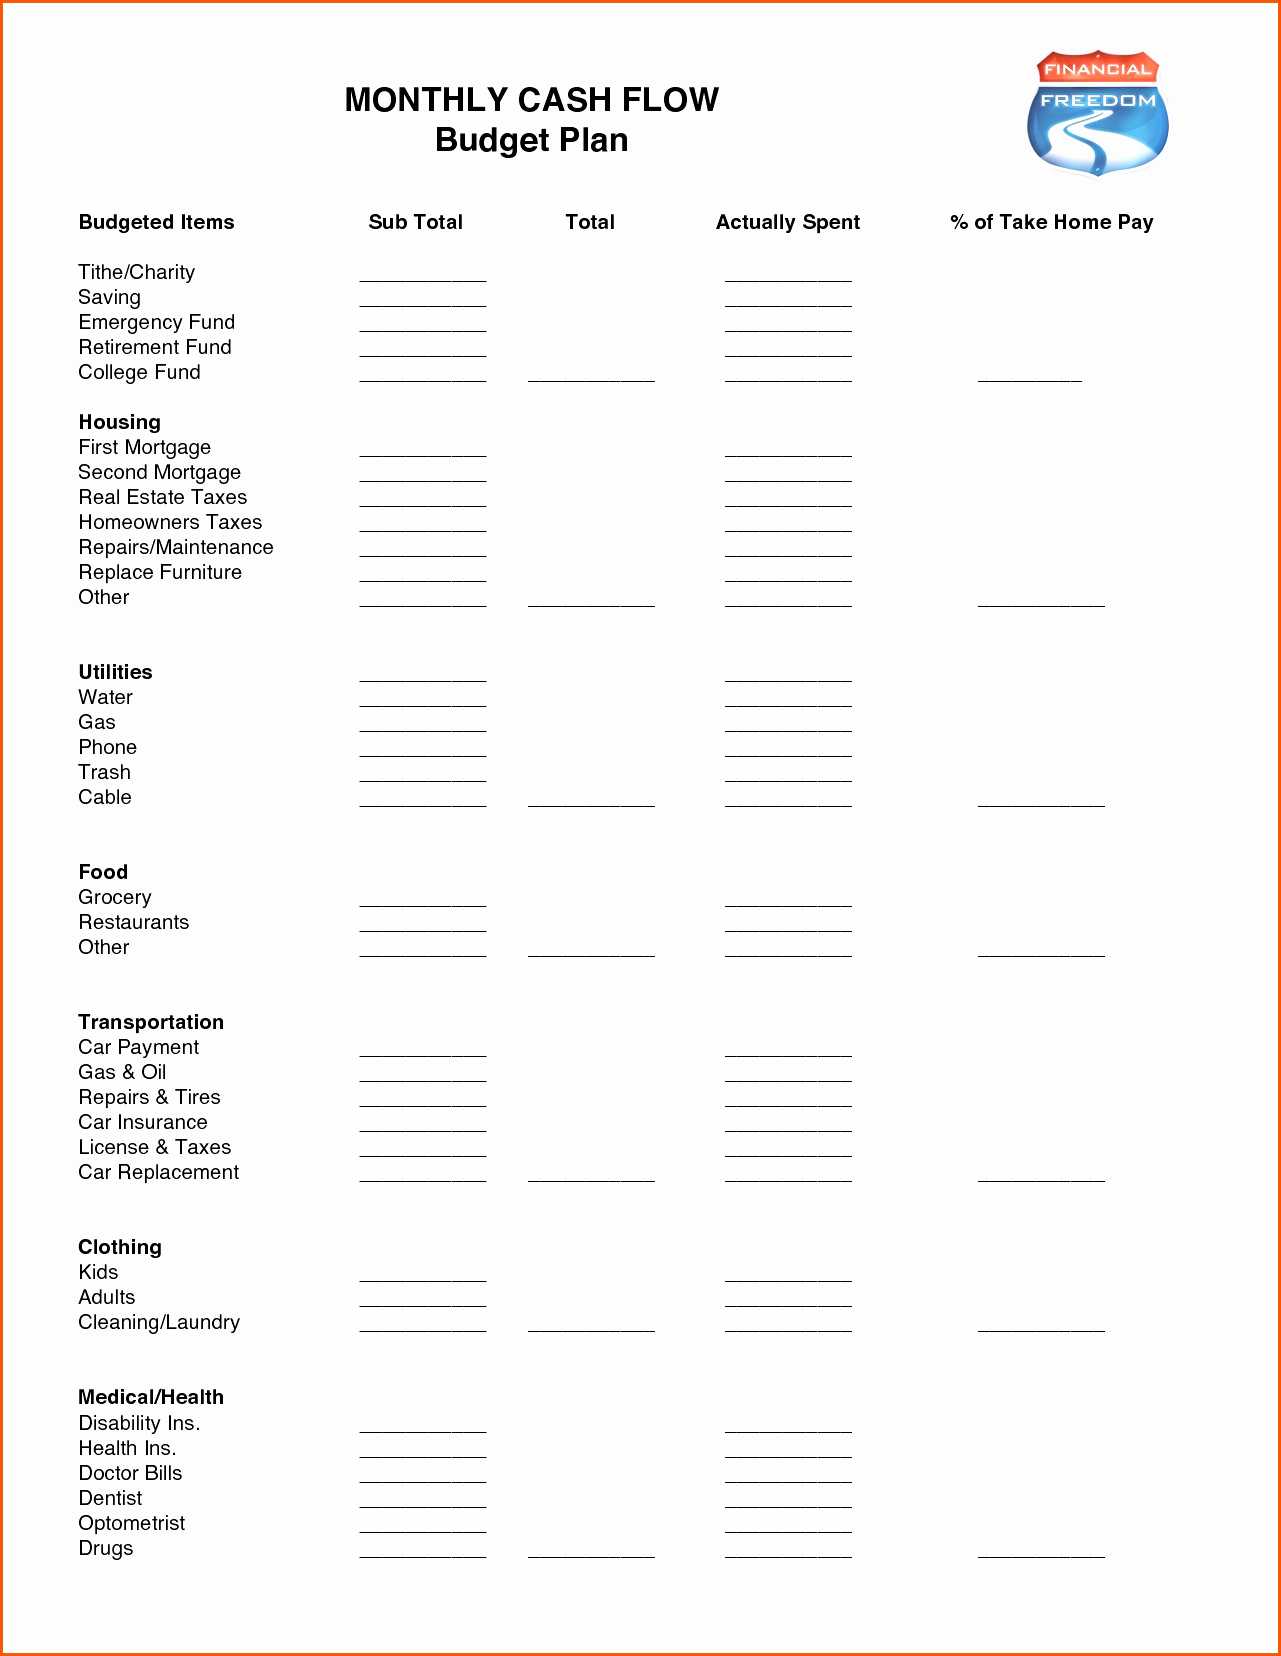 Cash Flow Budget Worksheet Along with Dave Ramsey Bud Spreadsheet Template Inspirational Dave Ramsey